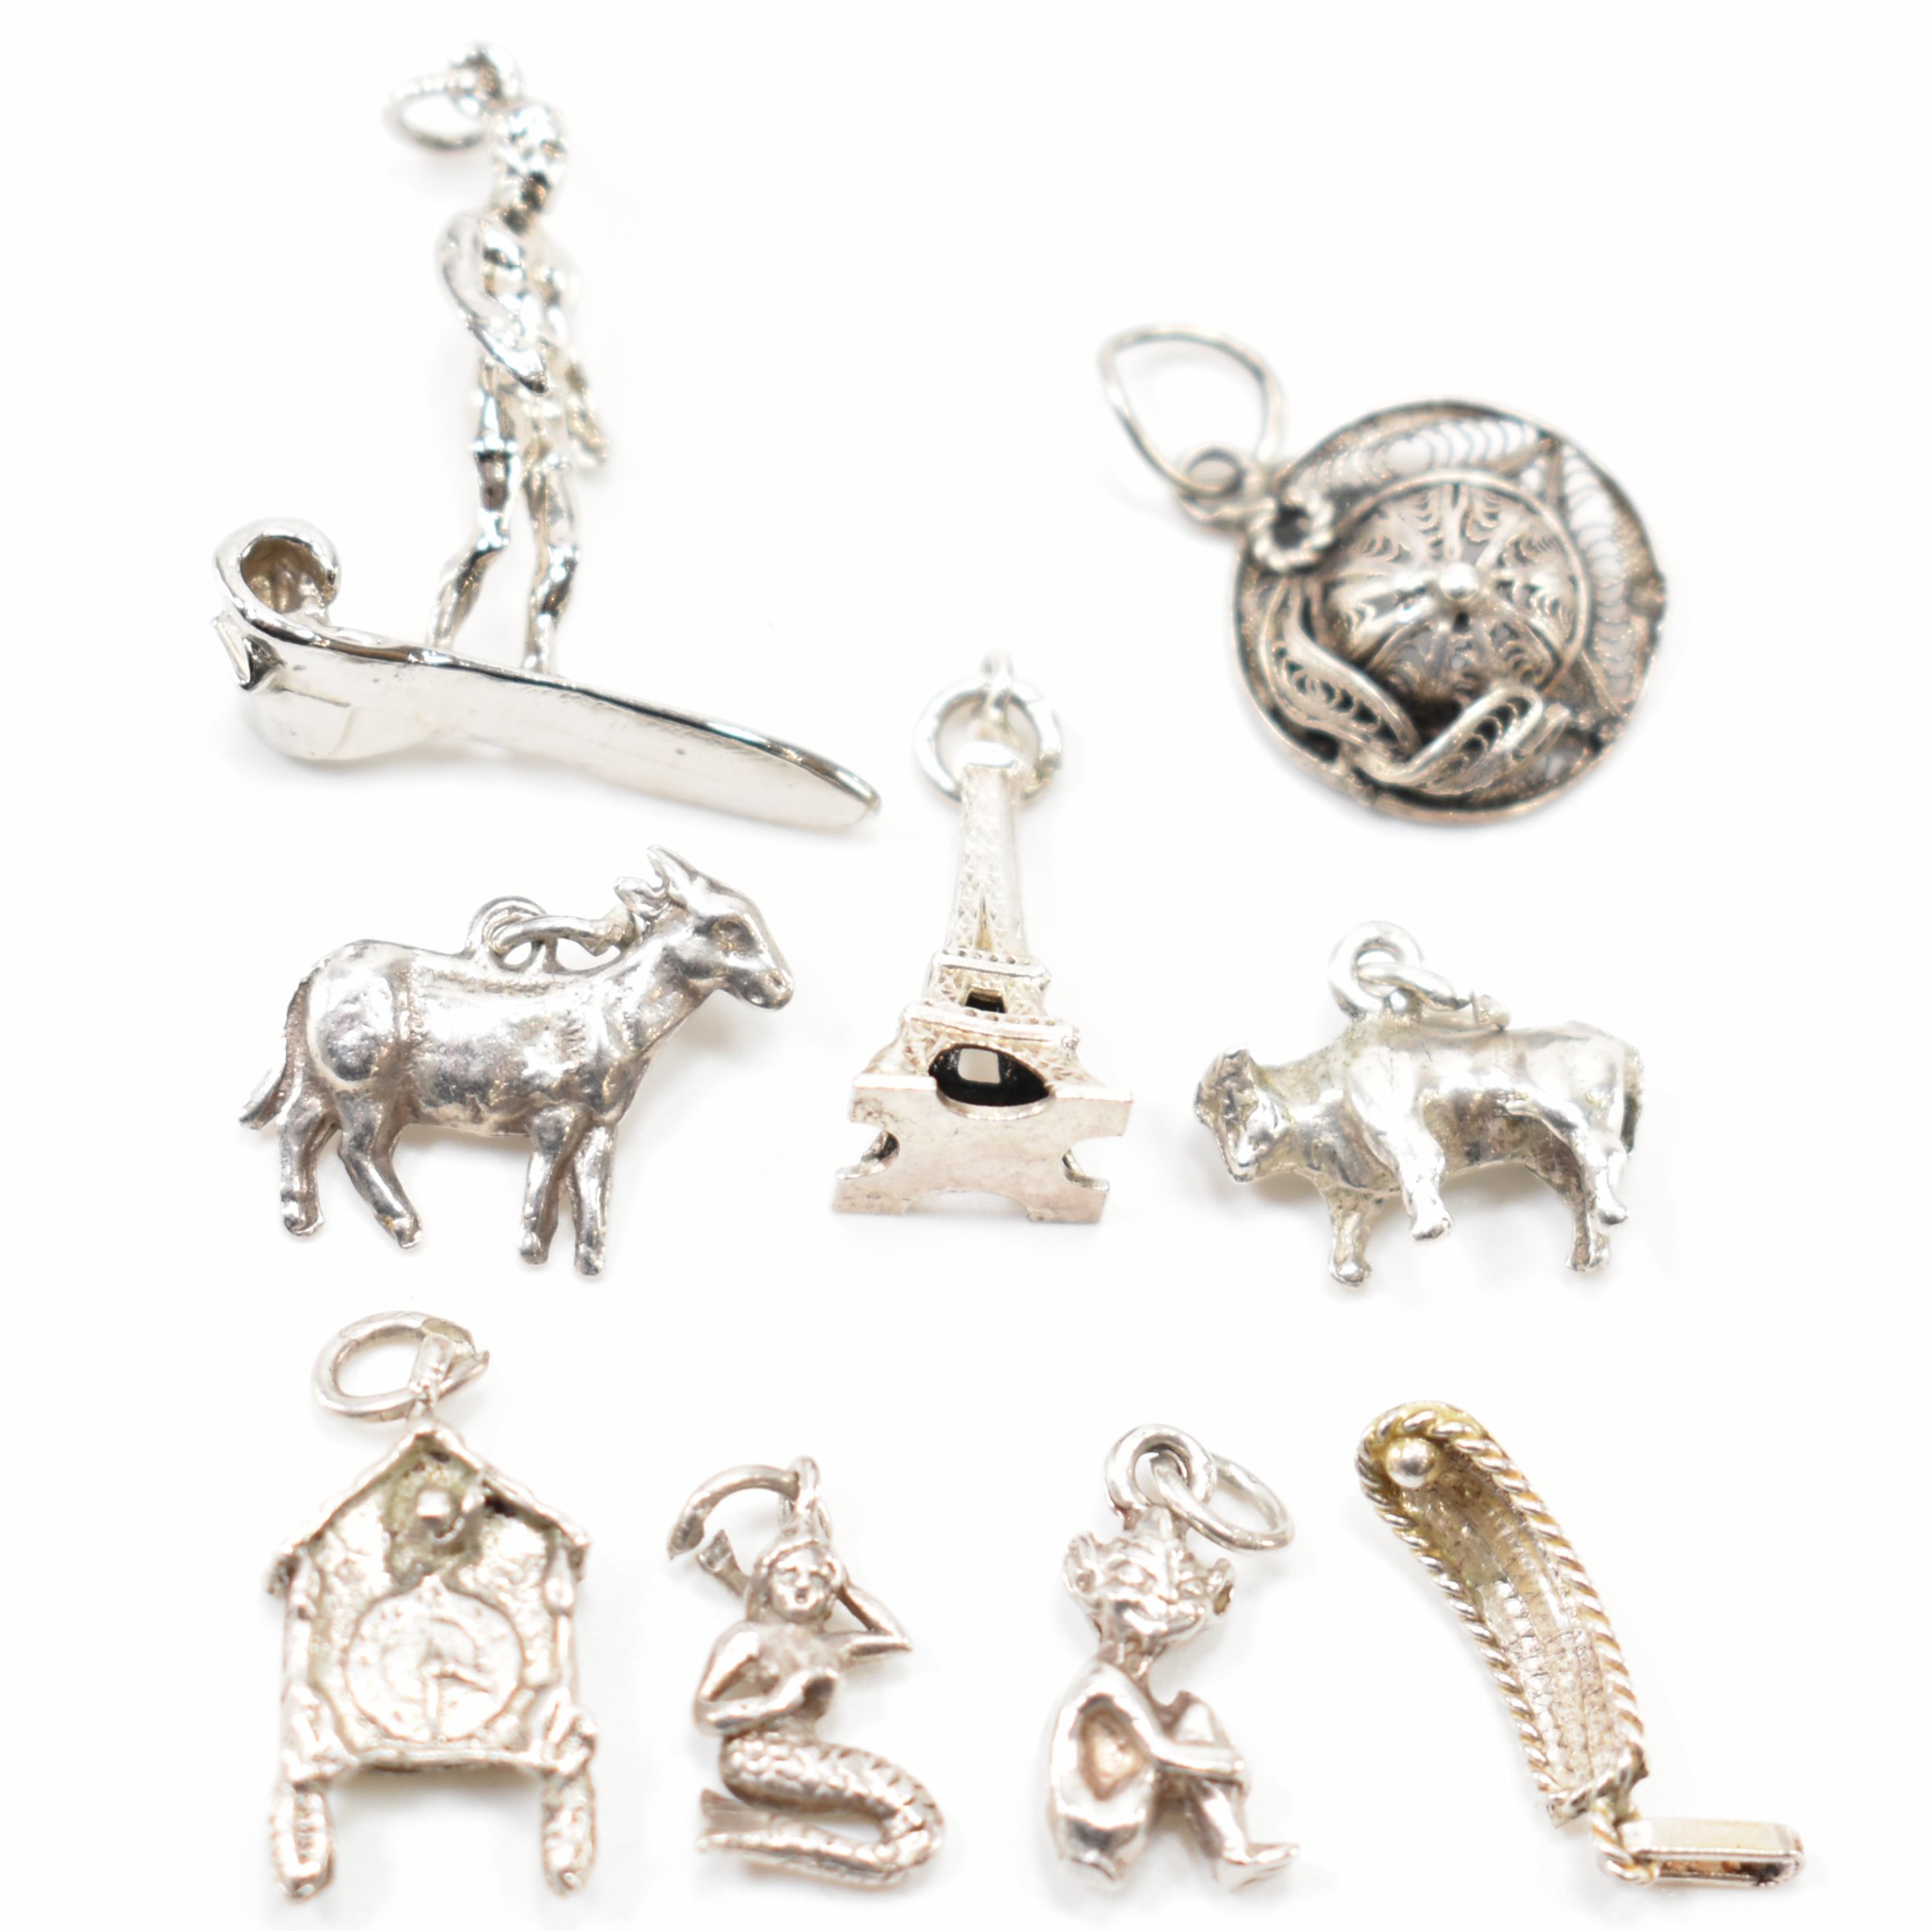 GROUP OF VINTAGE WHITE METAL CHARMS - Image 2 of 6